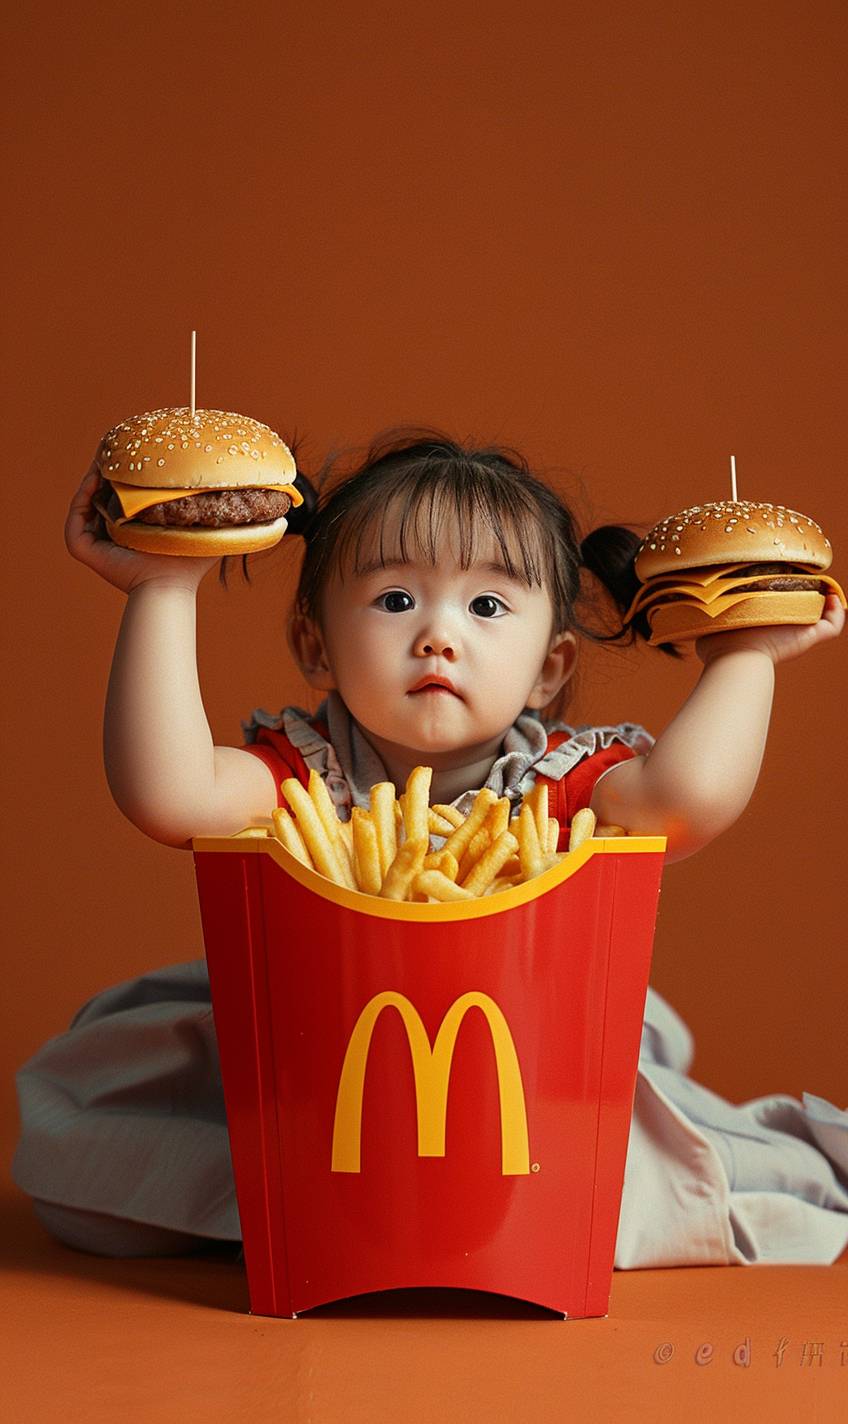 Real art photography, children's photo, a cute, wide-eyed 3-year-old girl sitting in a red box of McDonald's fries, With two burgers on each side of his head, a red lid open behind him, Chinese faces, With a cute, cute look on her face, hands clenched at her sides, With a playful character design and lively facial expressions in the style of photographic portraitures and advertising posters, the light orange and dark gray artwork has a kawaii art style.